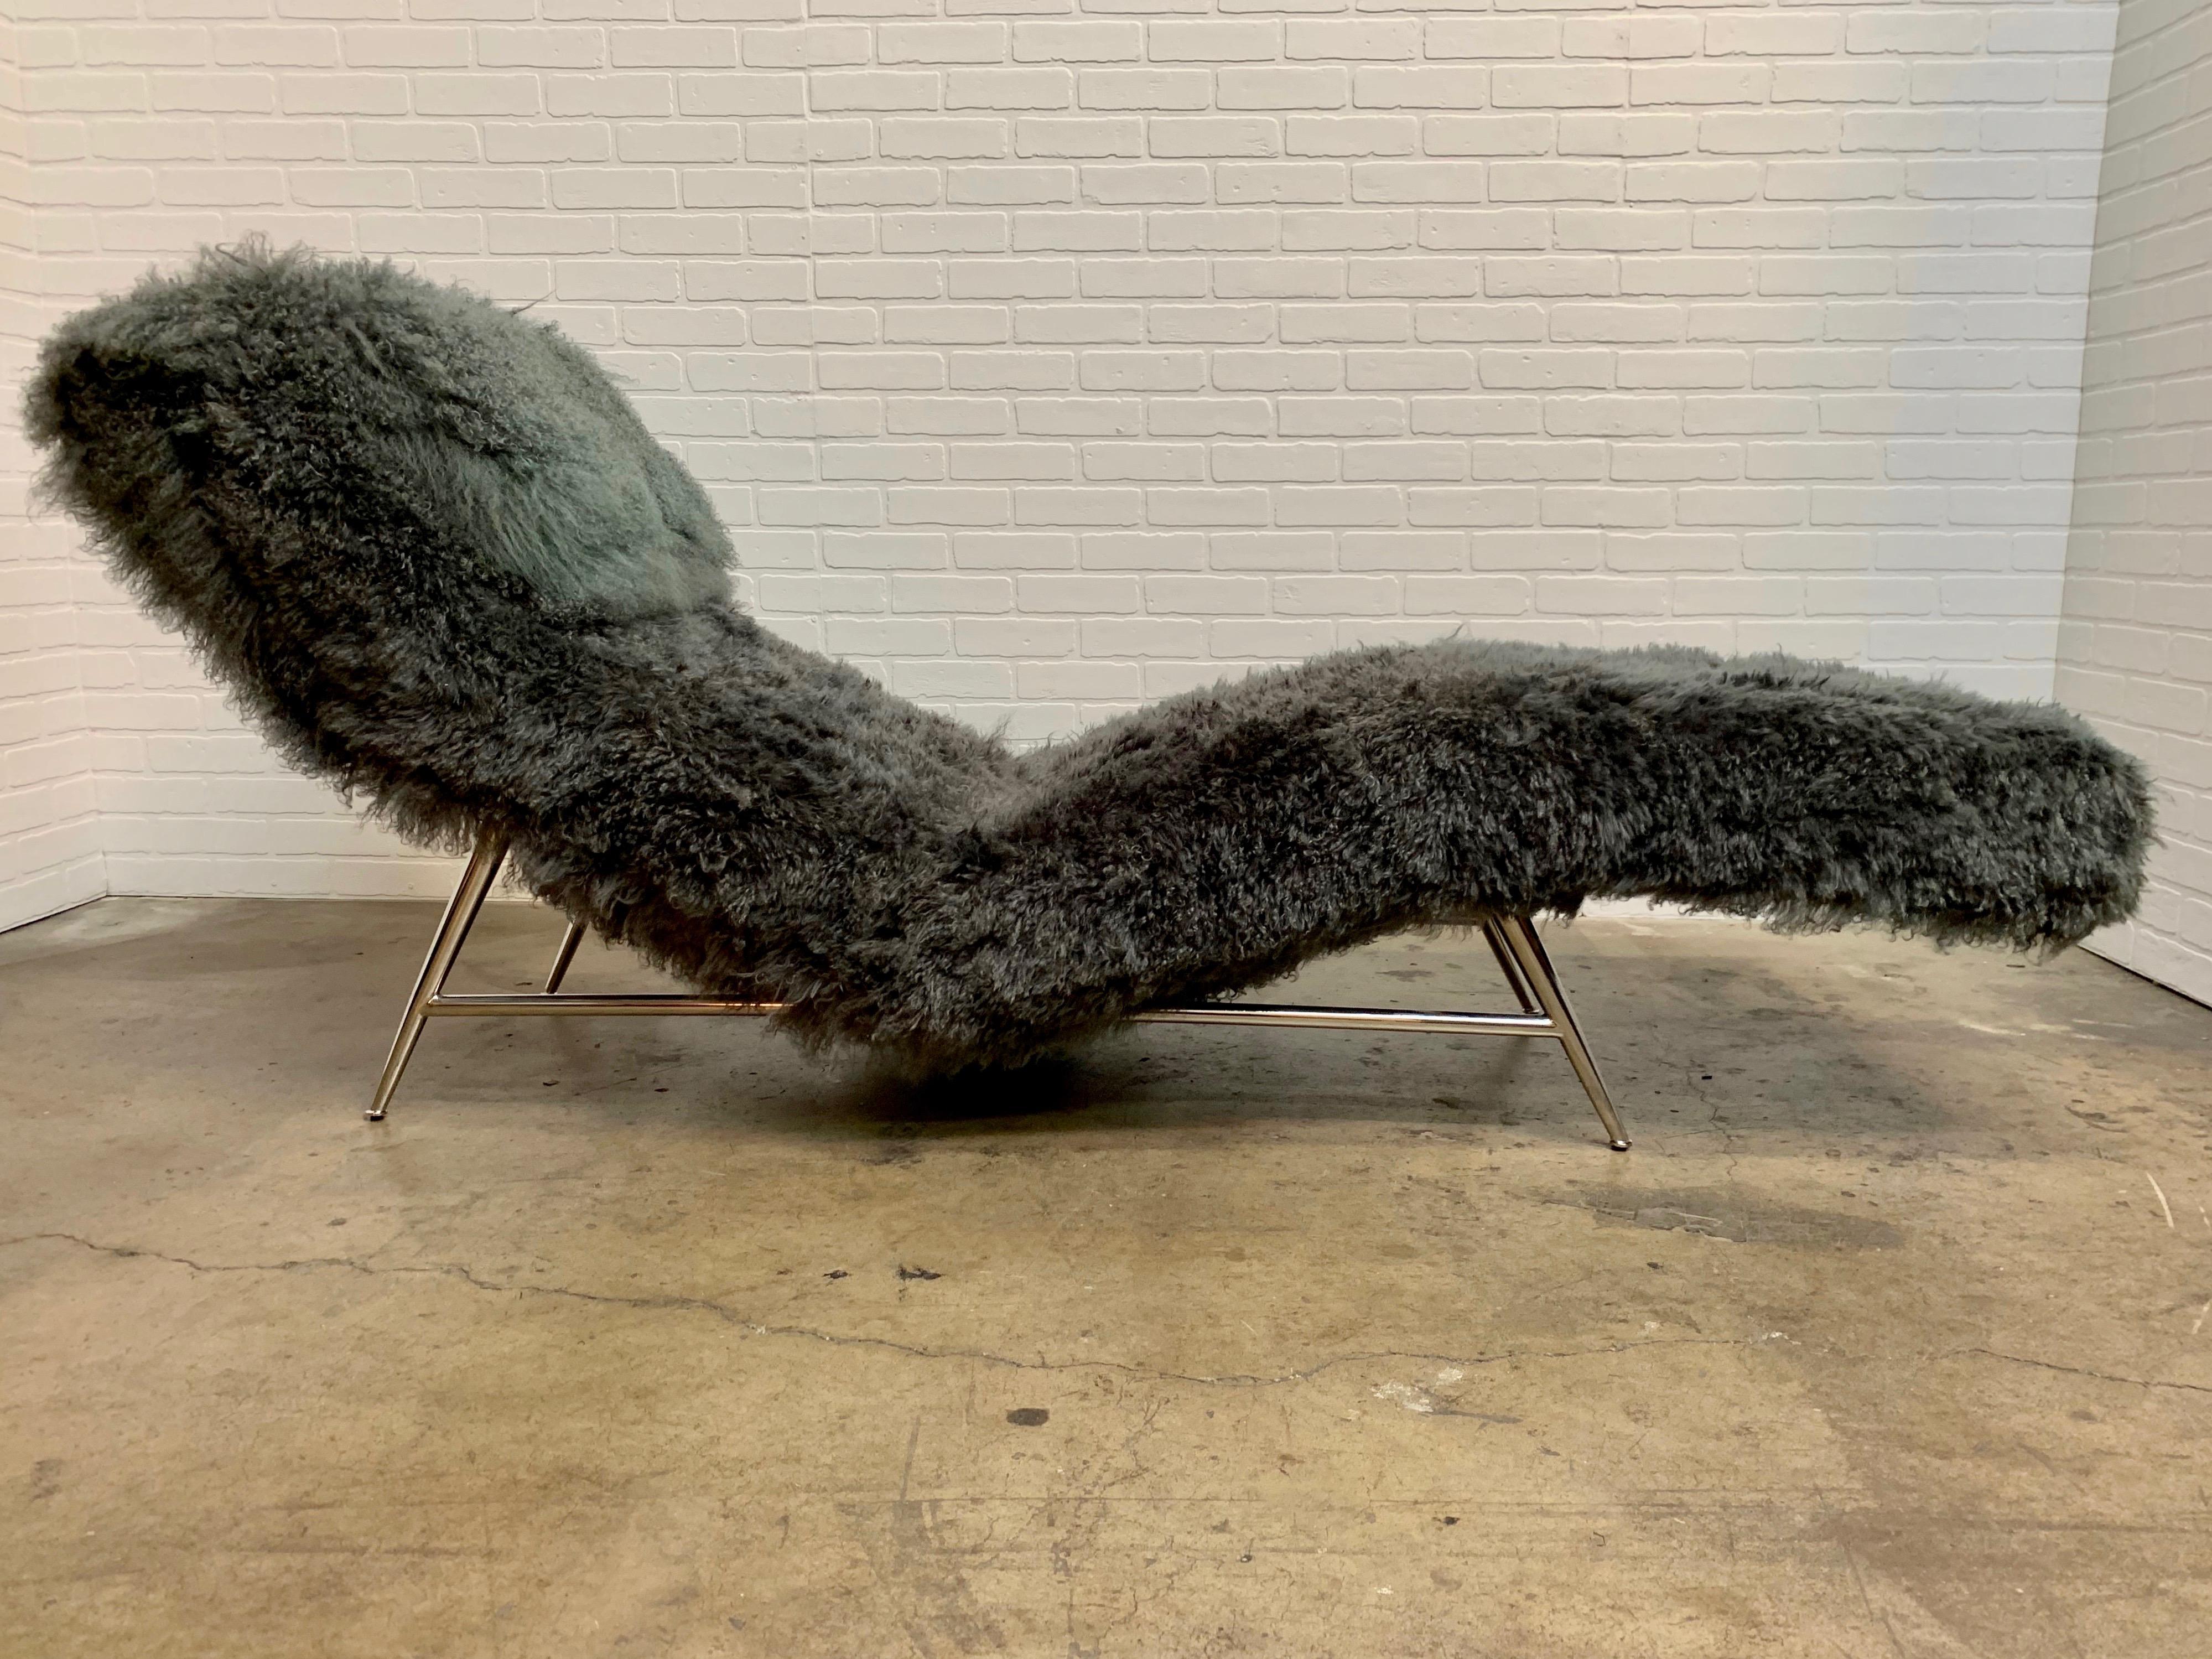 Vintage contemporary version made by Thayer Coggin with Milo Baughman tag on the underside covered in Tibeten wool
Believed to be one of Milo Baughman's original design proposals to Thayer Coggin during their initial meeting in 1953, This